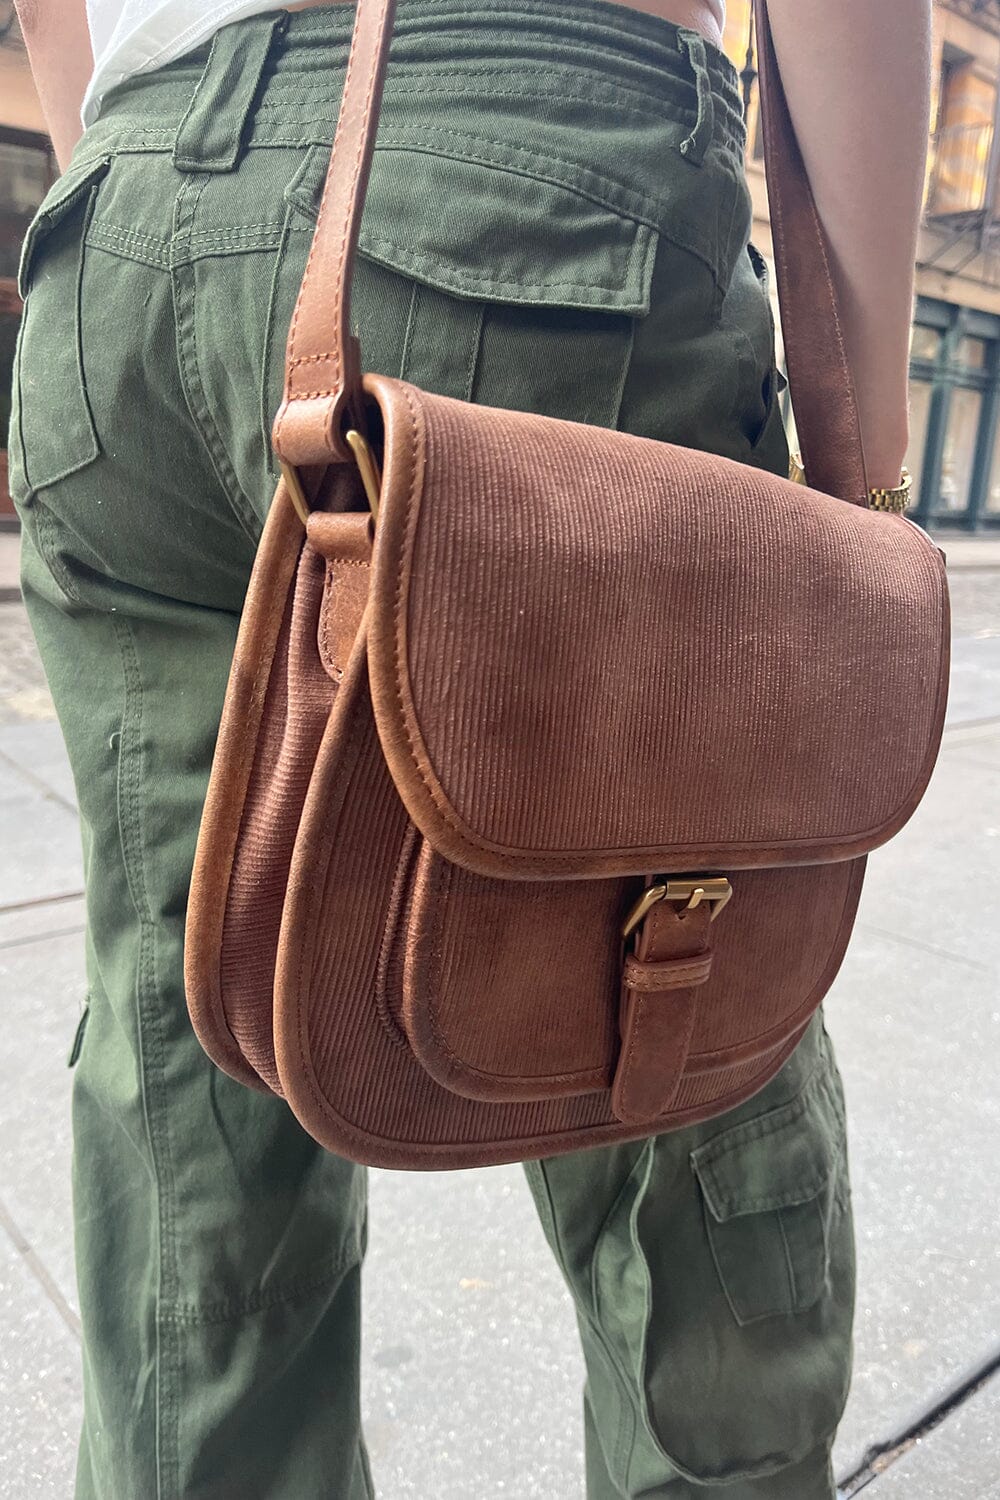 Brown Leather Purse 